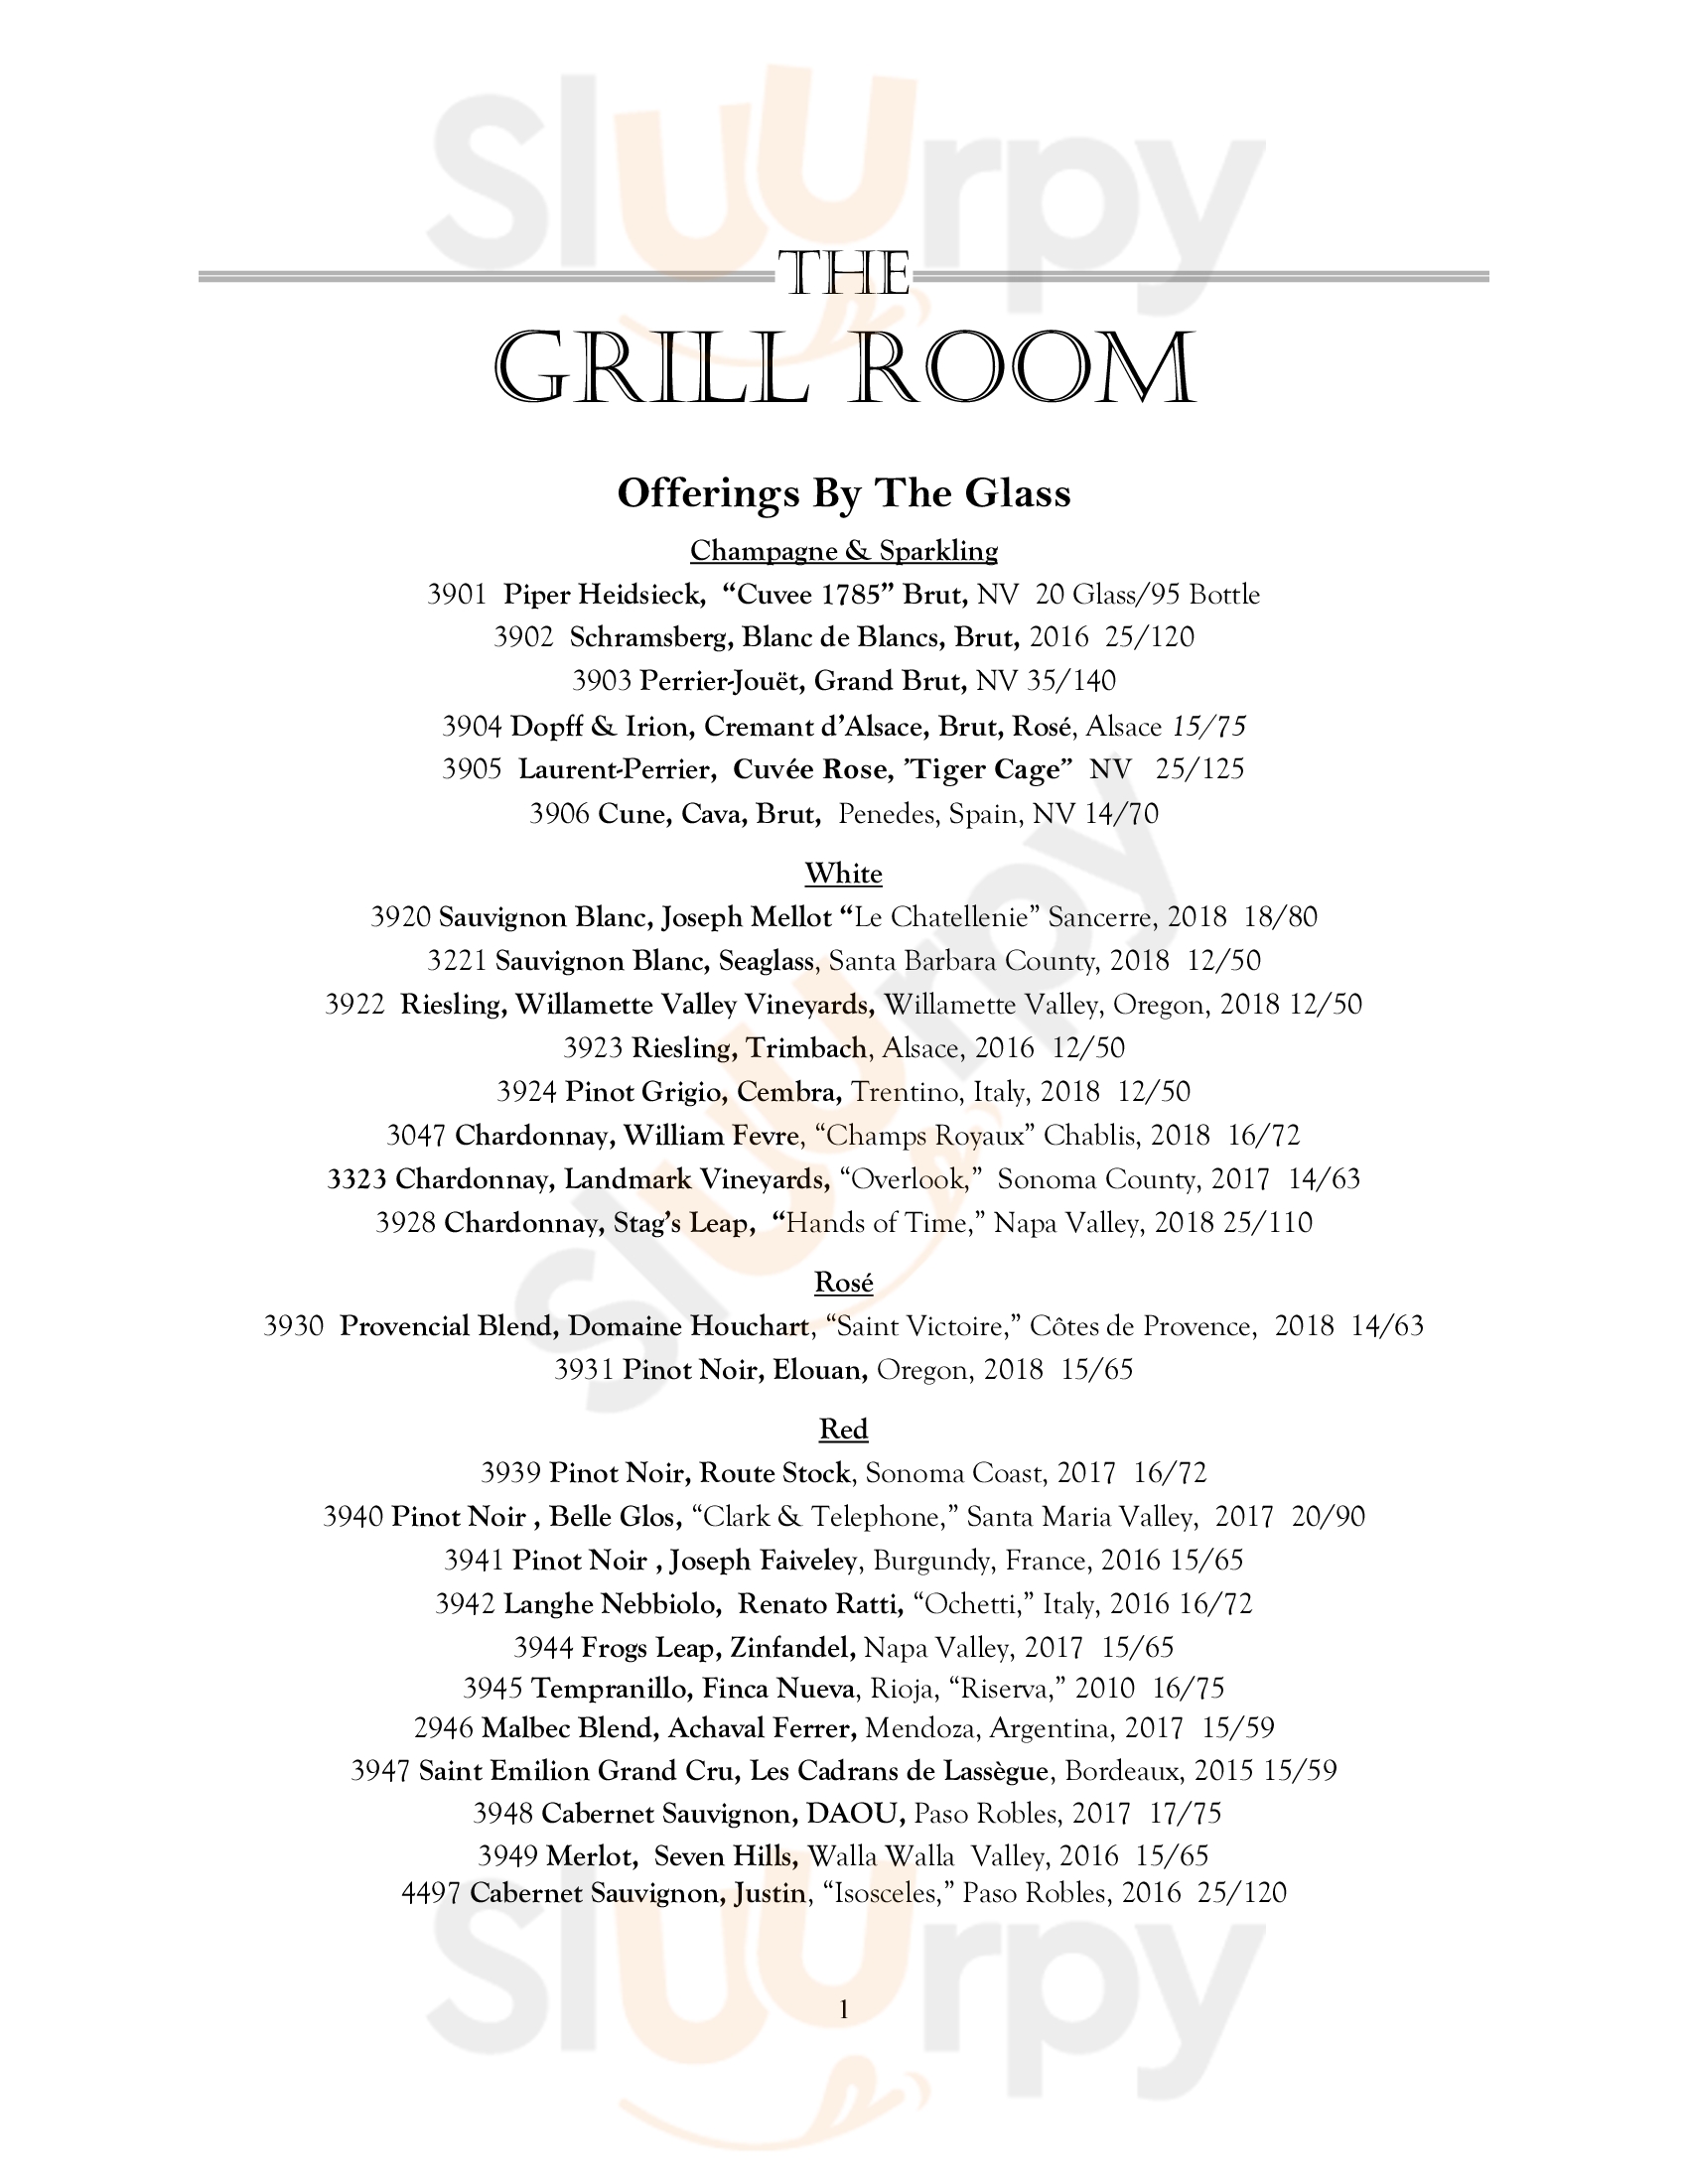 The Grill Room New Orleans Menu - 1